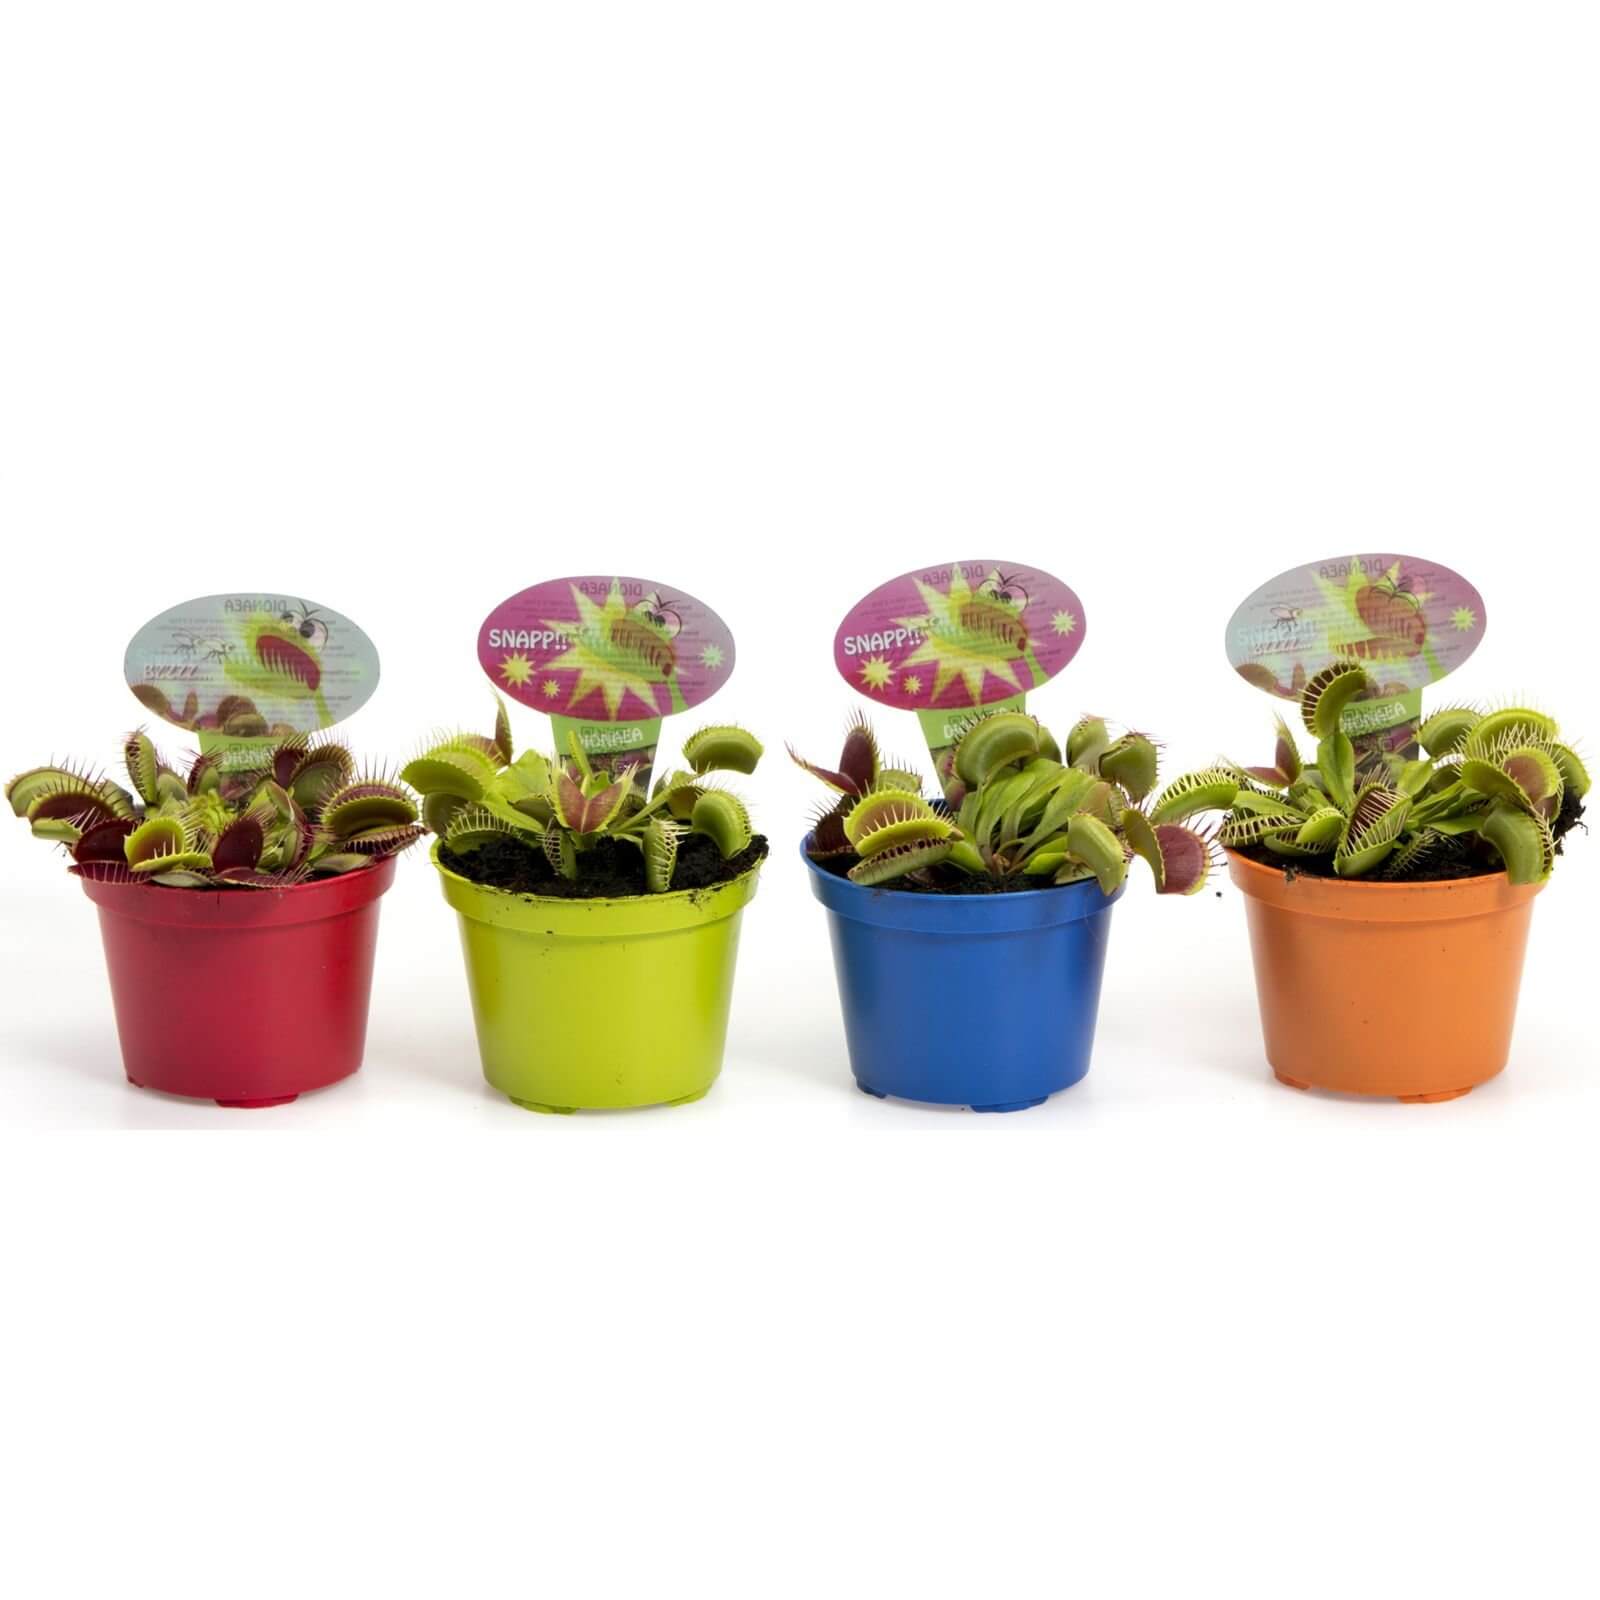 Venus Fly Trap (Multiple Options Available)